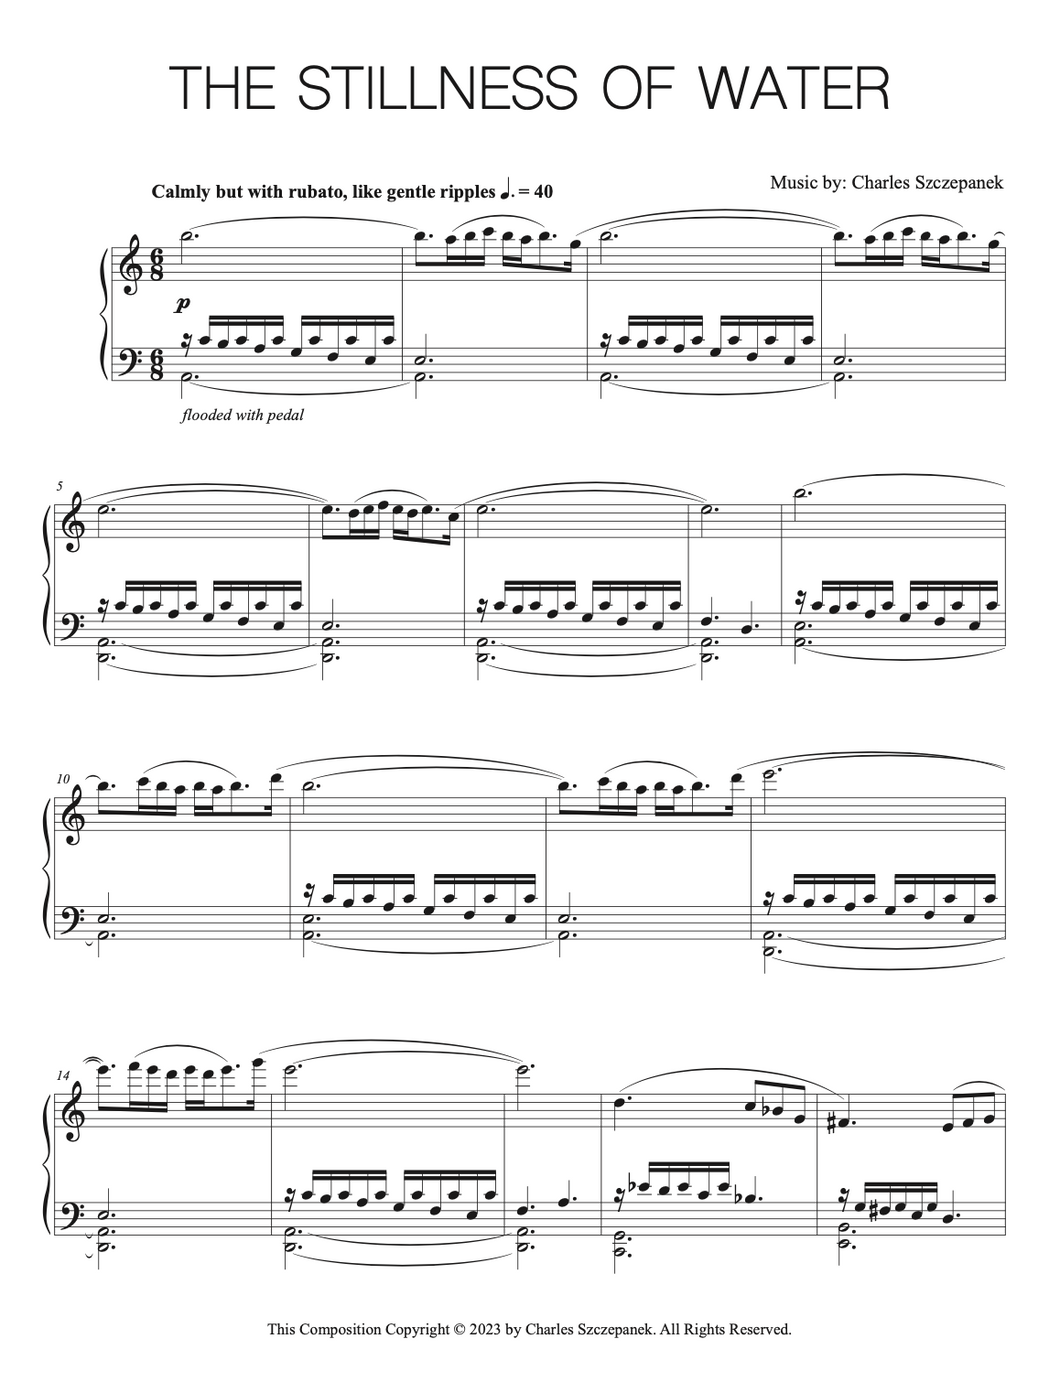 The Stillness of Water - Sheet Music for Solo Piano